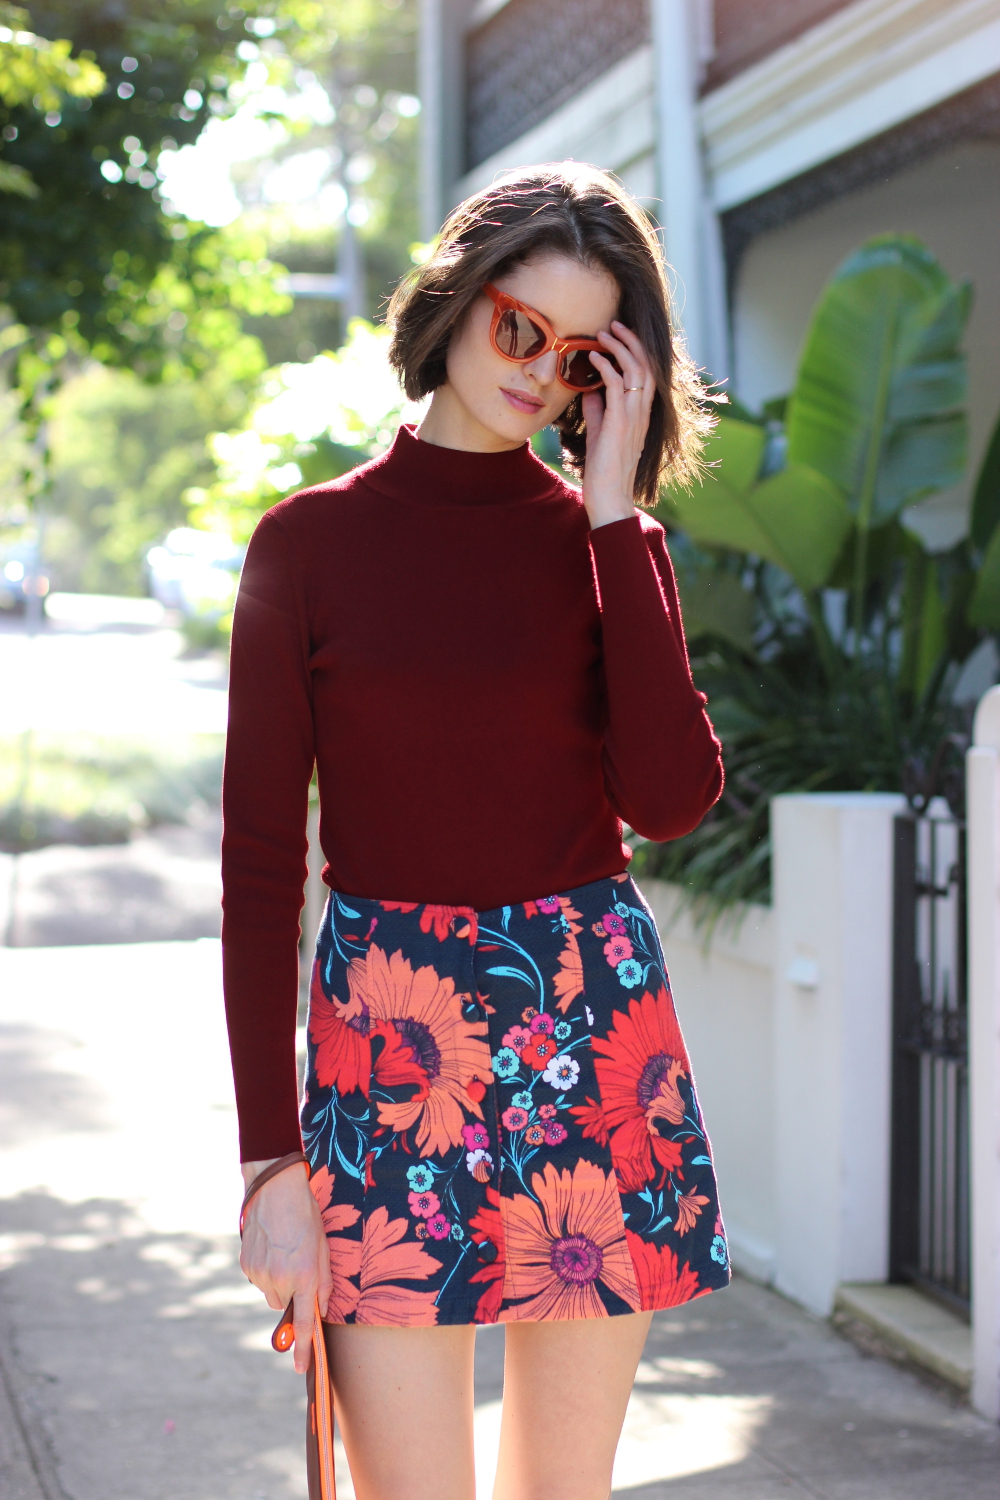 BY CHILL BLOG | Chloe Hill Wearing Pared Eyewear orange puss and boots sunglasses, Cue clothing burgundy jumper and top shop floral print sixties mini skirt